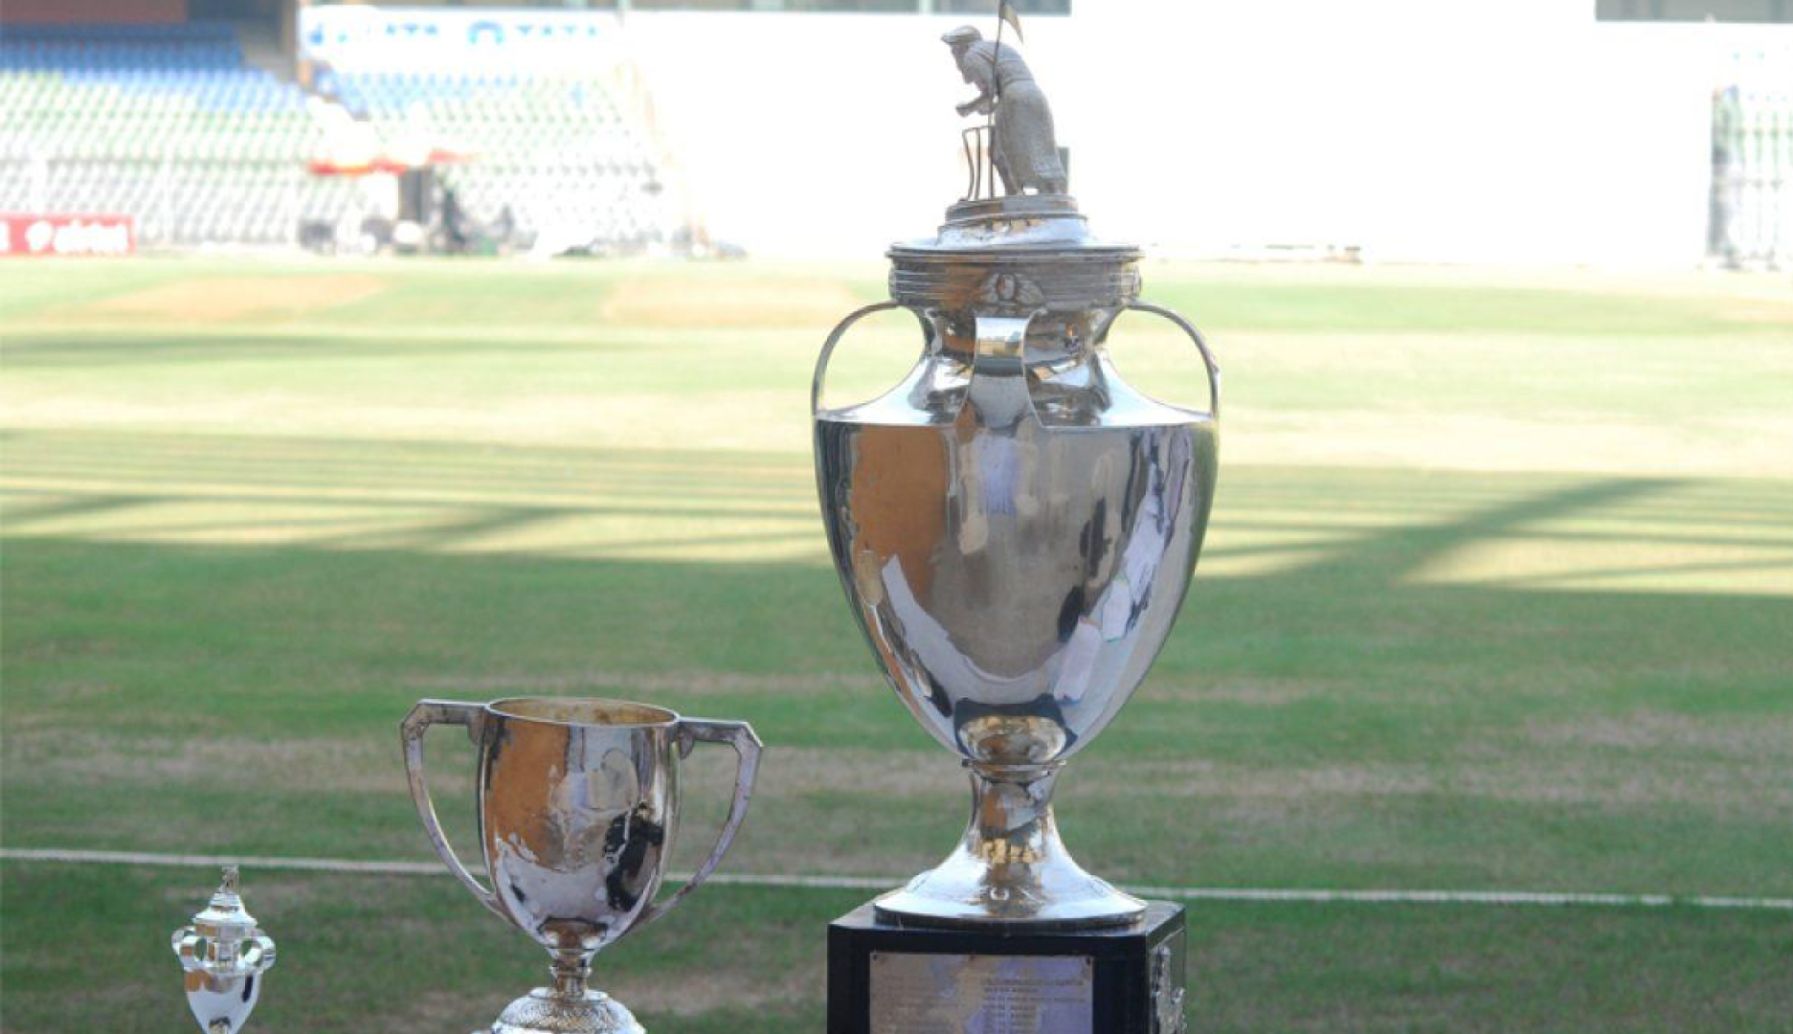 Bumper domestic schedule announced with Ranji Trophy Knockouts at Kolkata and SMAT at Delhi